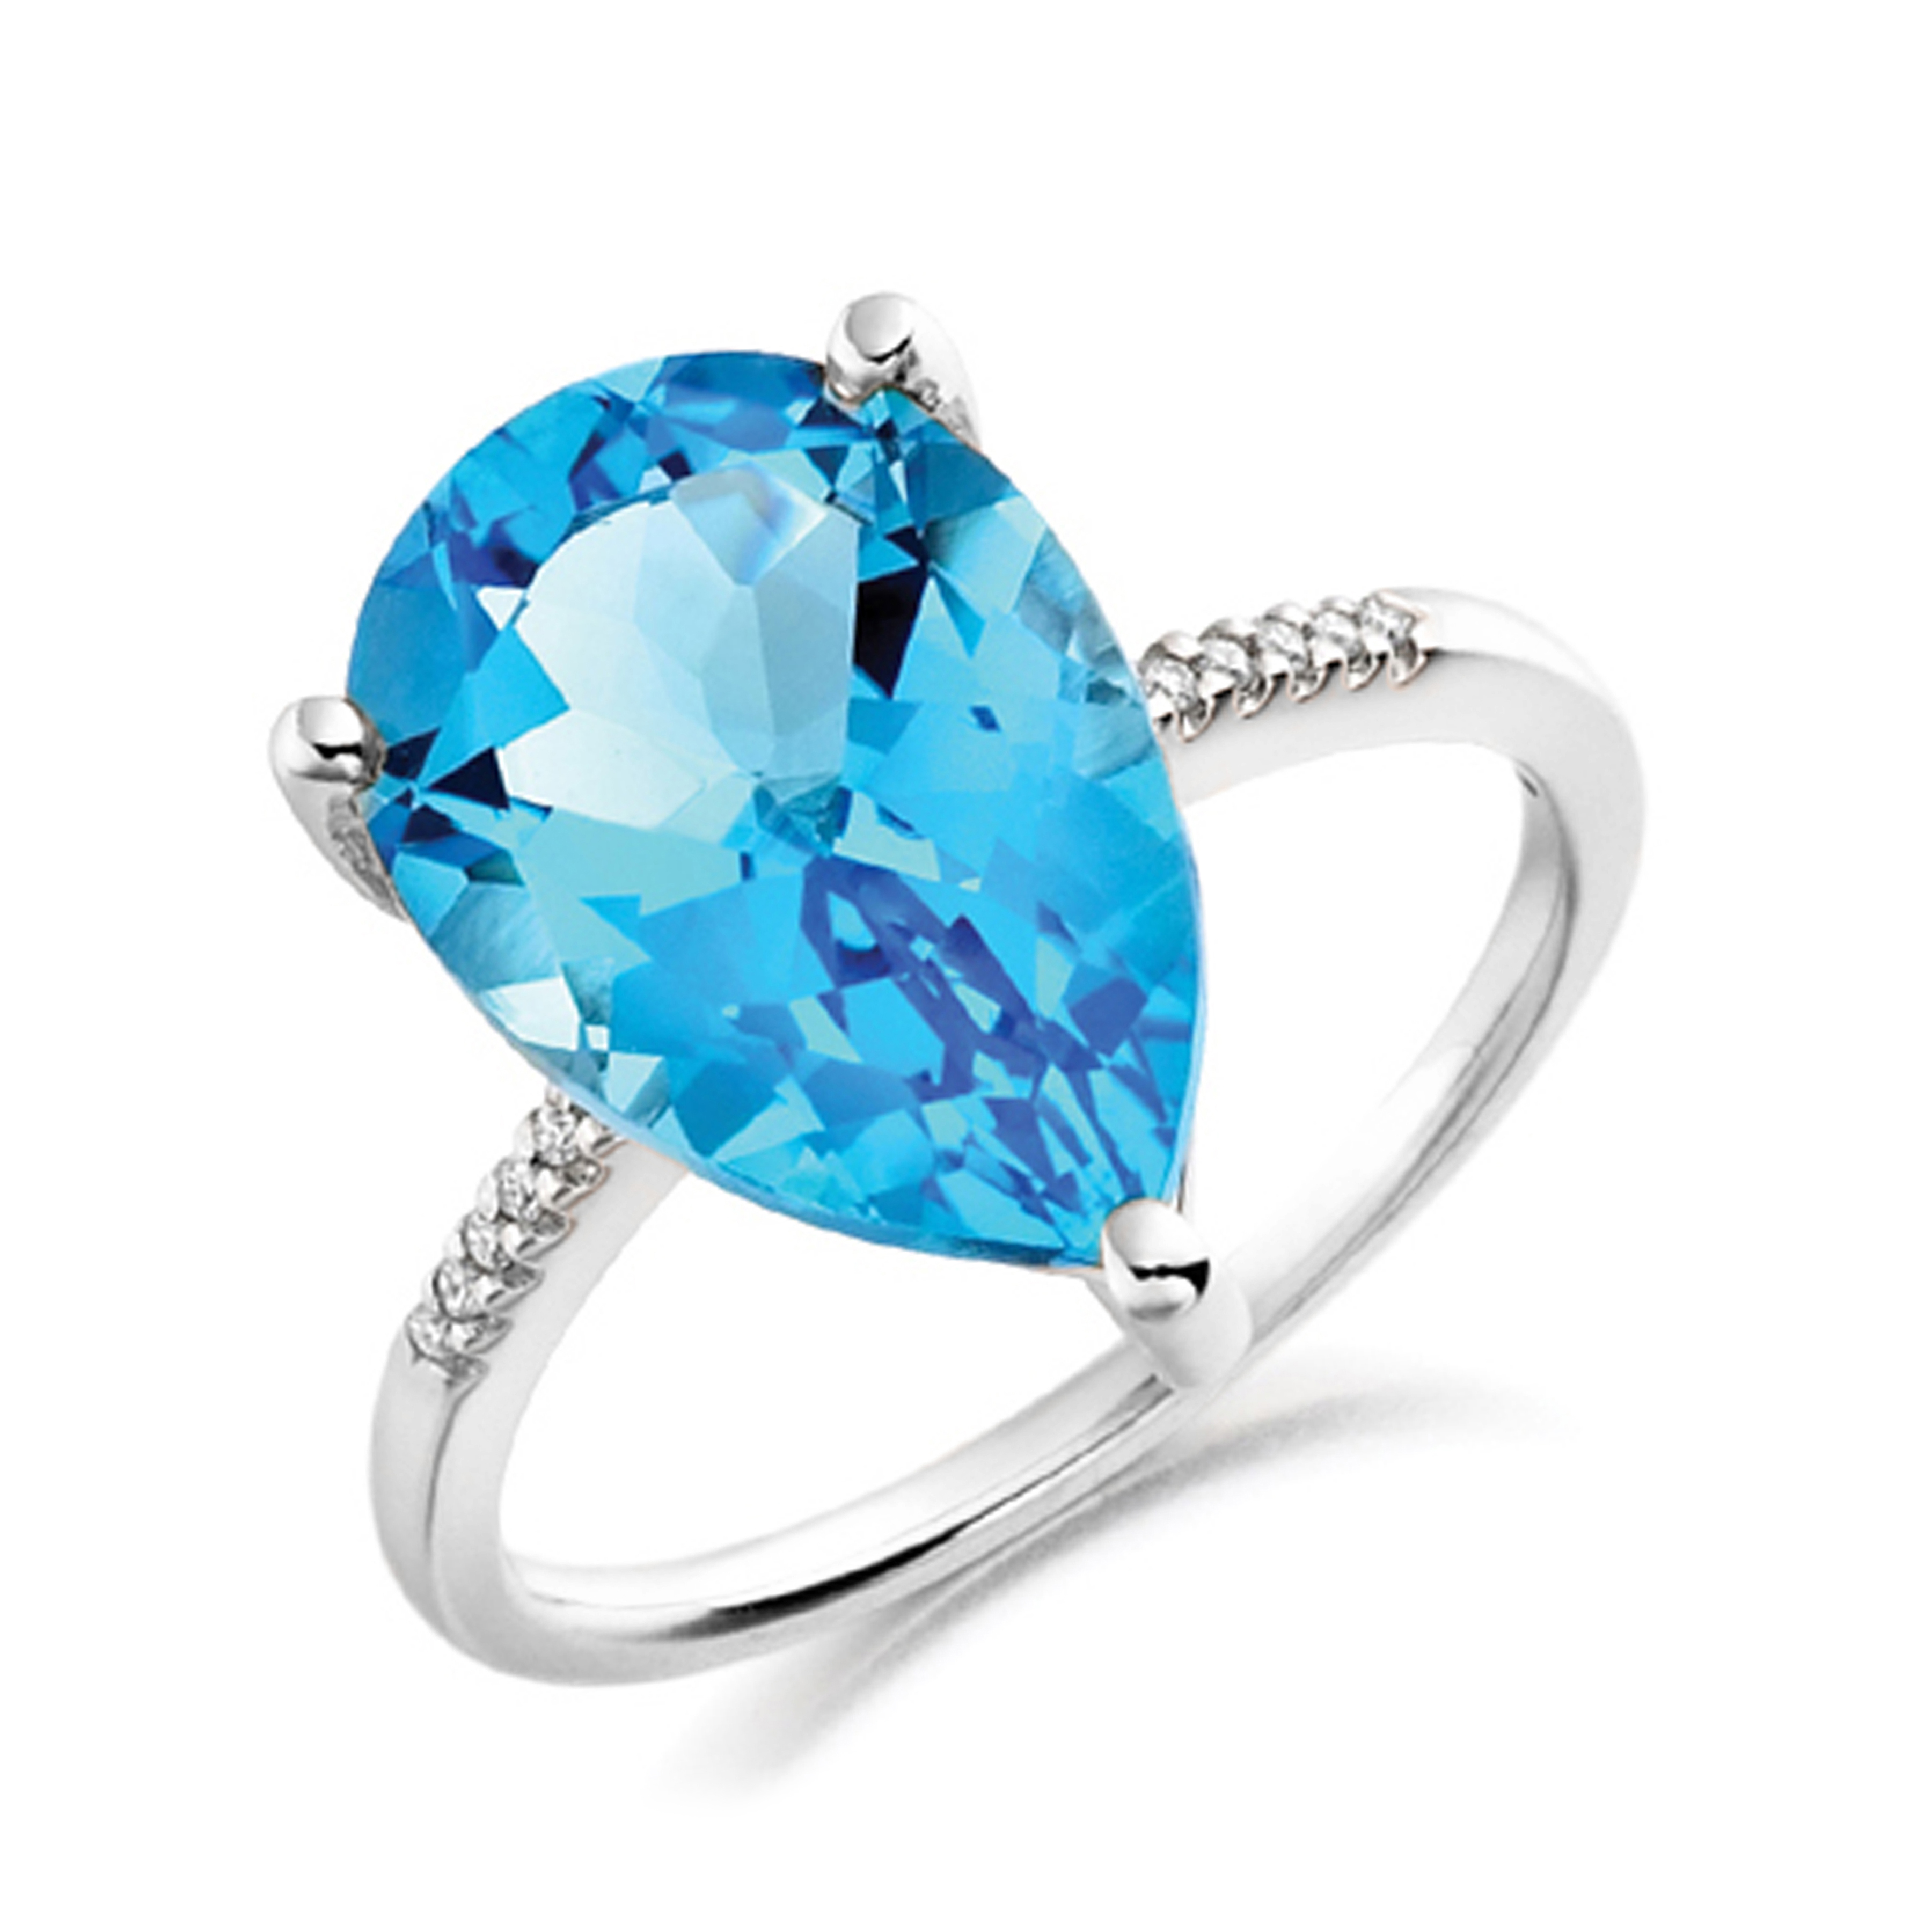 14X10mm Pear Blue Topaz Stones On Shoulder Diamond And Gemstone Engagement Ring